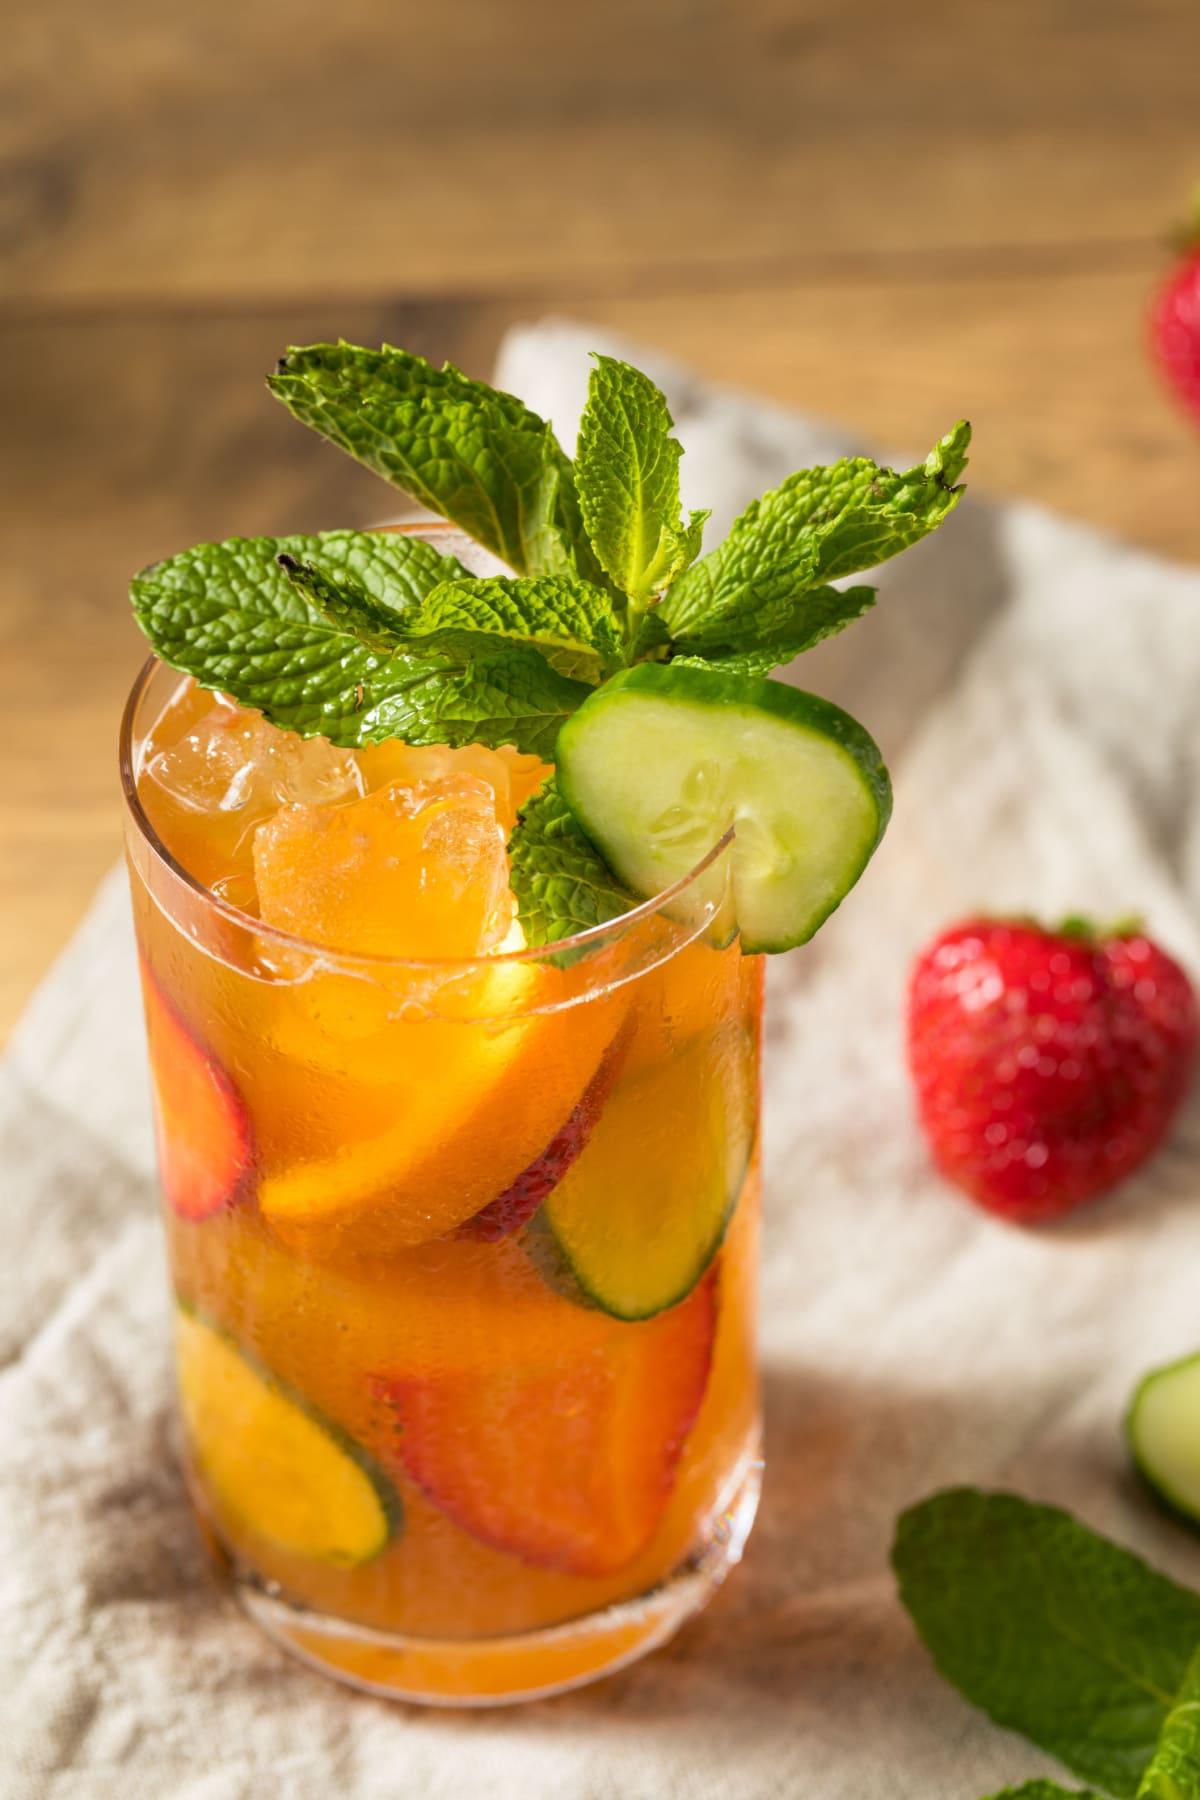 Pimm’s Cup Cocktail (Classic British Recipe) featuring Pimm's Cup cocktail in highball glass filled with ice, slices of lemon, cucumber, strawberries, and mint sprig. 